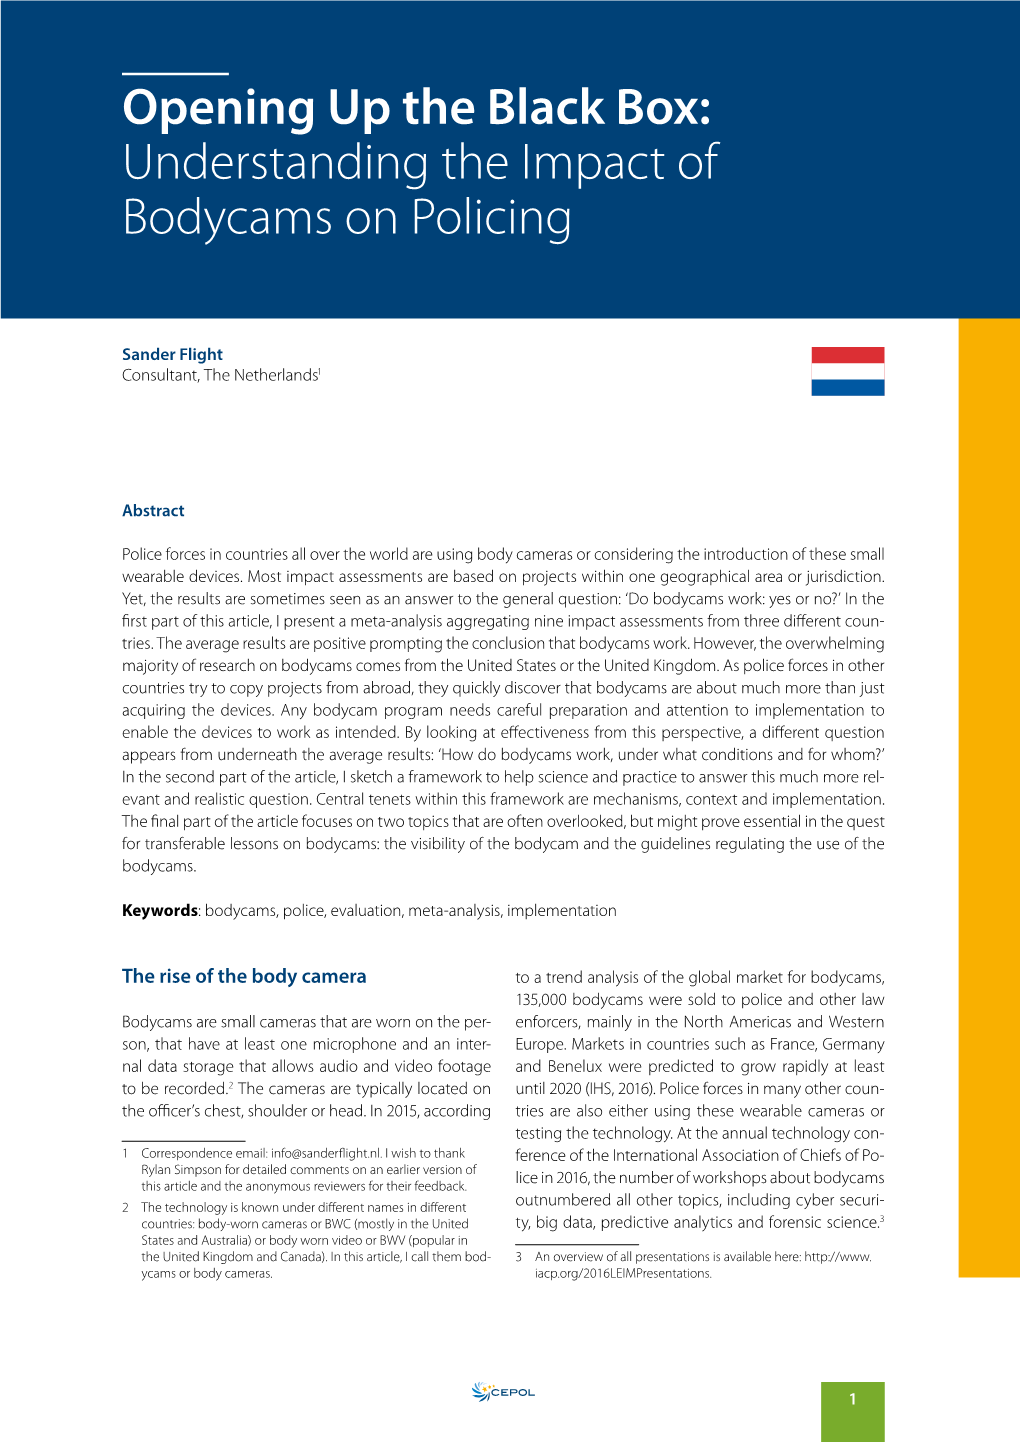 European Police Science and Research Bulletin